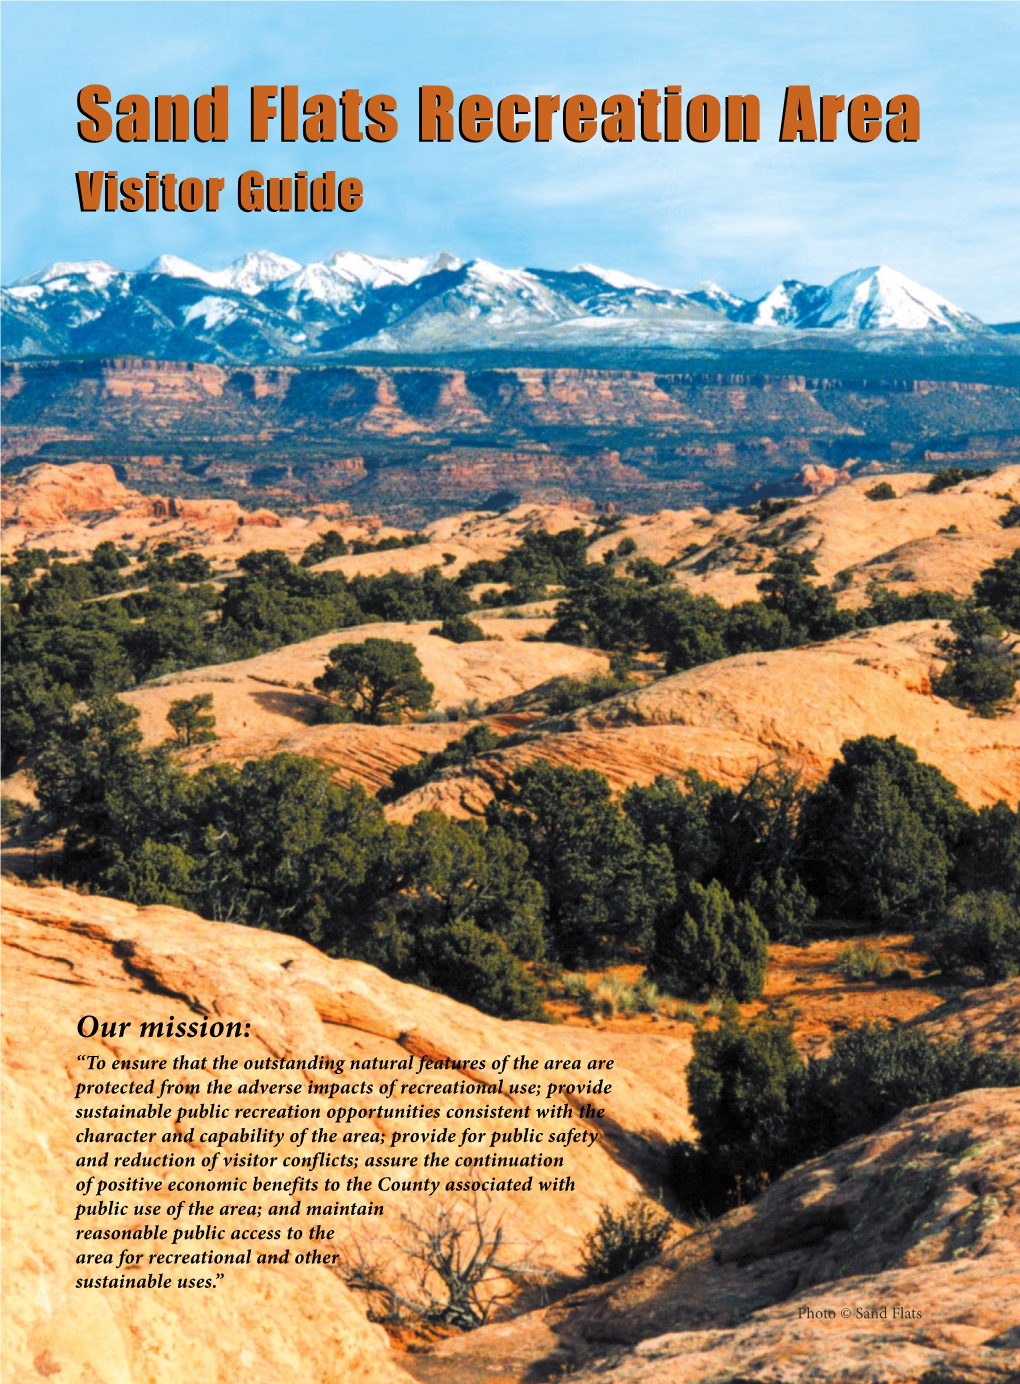 Sand Flats Recreation Area Visitor Guide